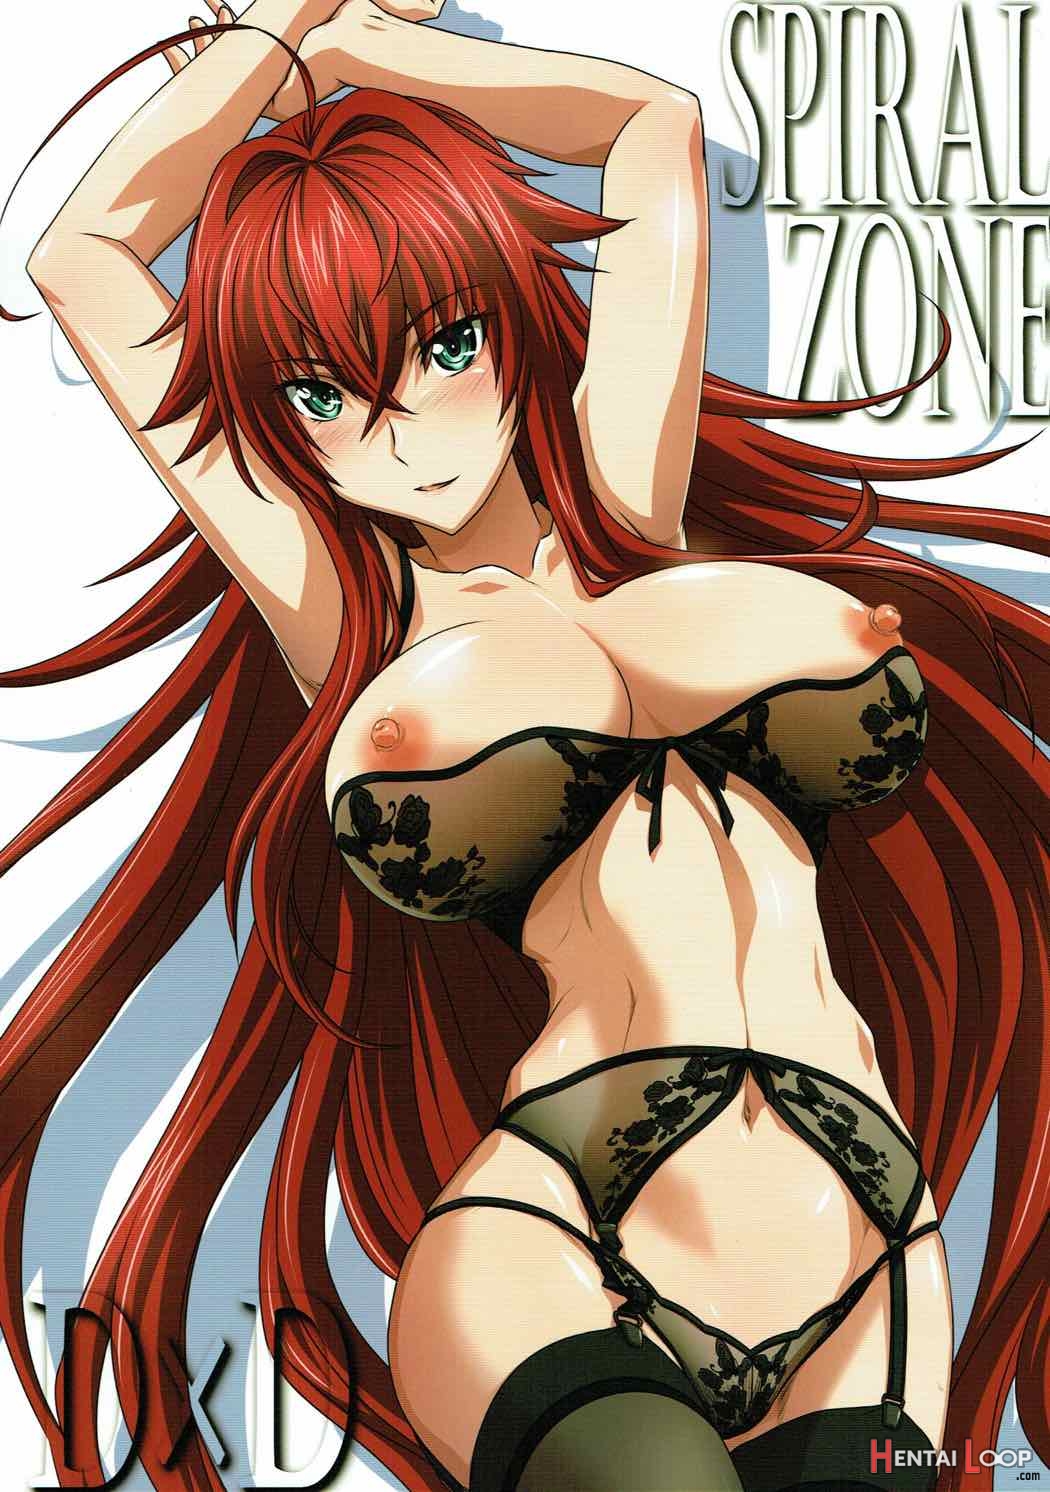 Spiral Zone Dxd page 1